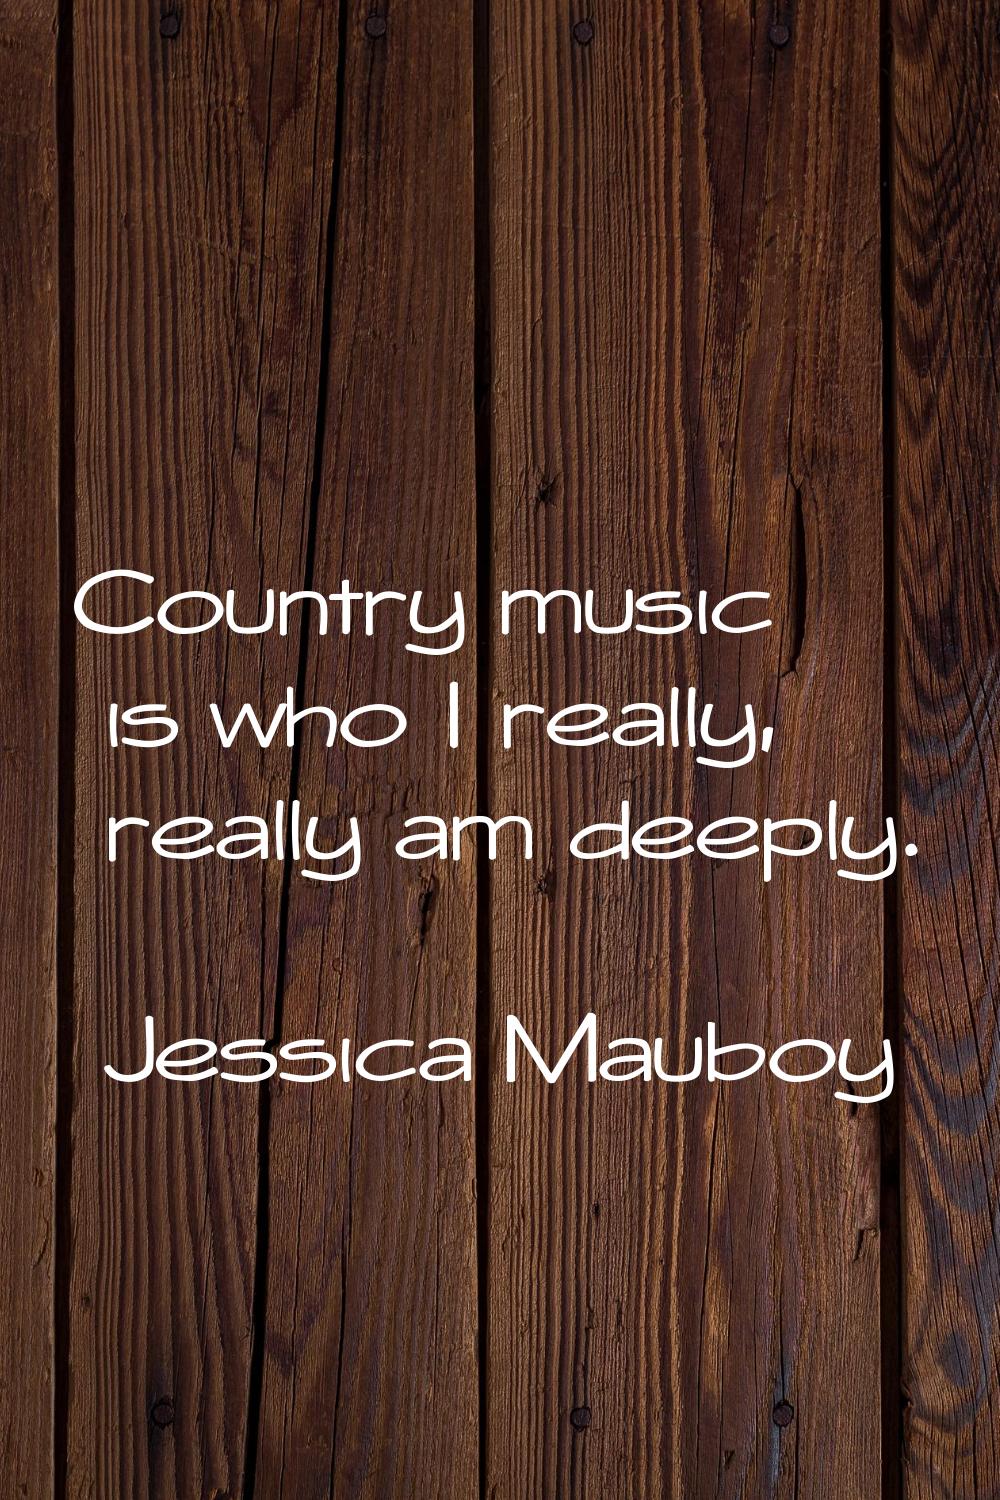 Country music is who I really, really am deeply.